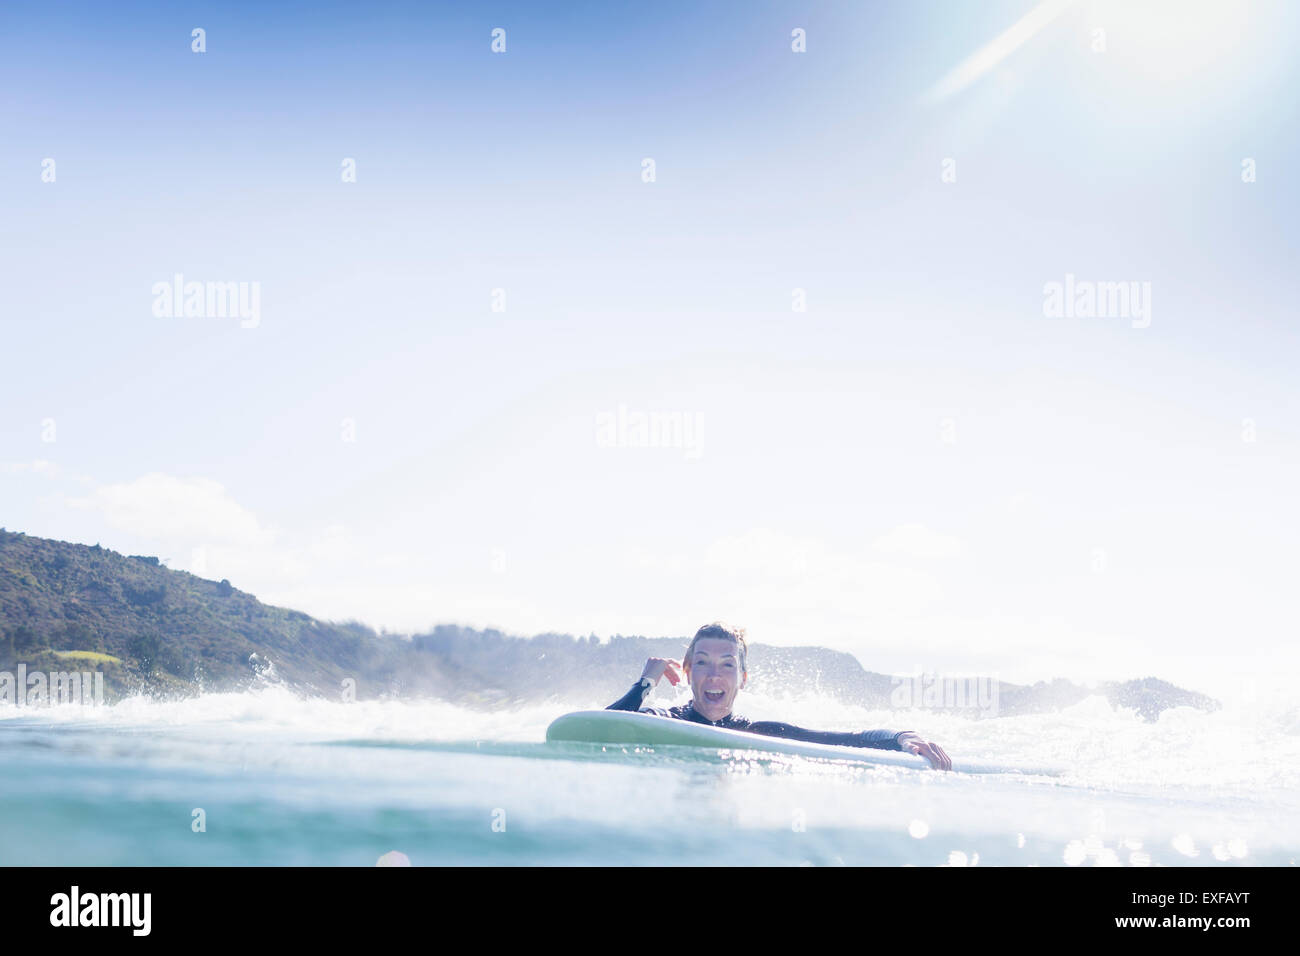 Surfer in the water, Bay of Islands, New Zealand Stock Photo